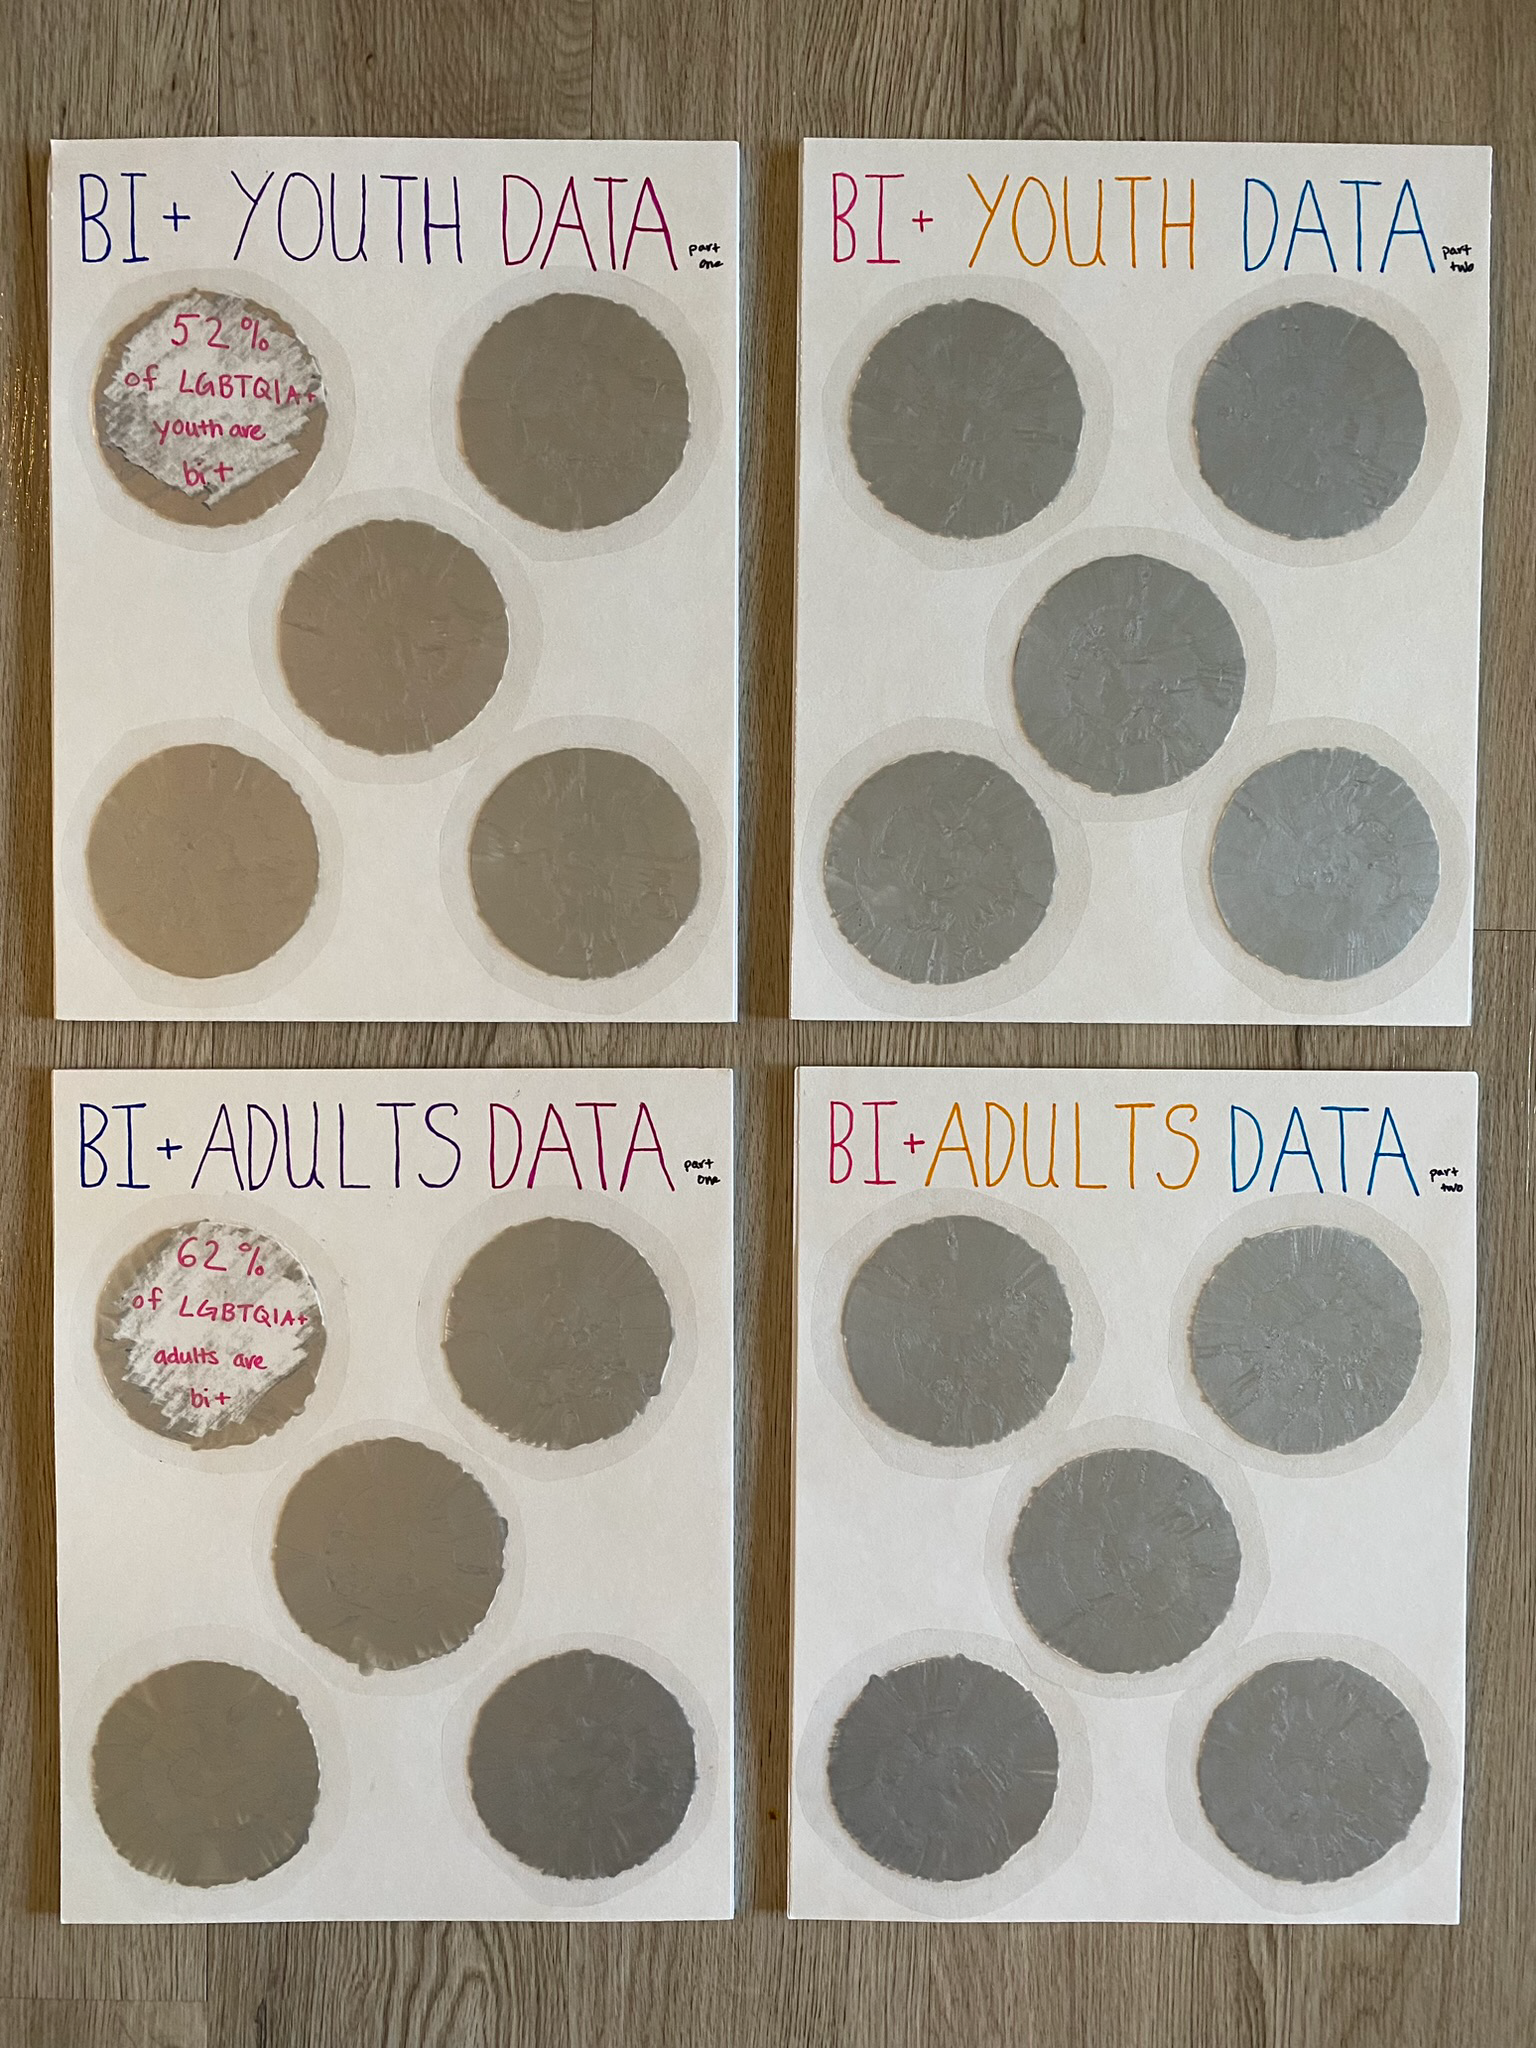 Image shows the completed scratch off cards. Two of the cards each have one data point visible; the rest are covered with silver scratch-off paint. One reads, 52% of LGBTQIA+ youth are bi+"; the other reads "62% of LGBTQIA+ adults are bi+."